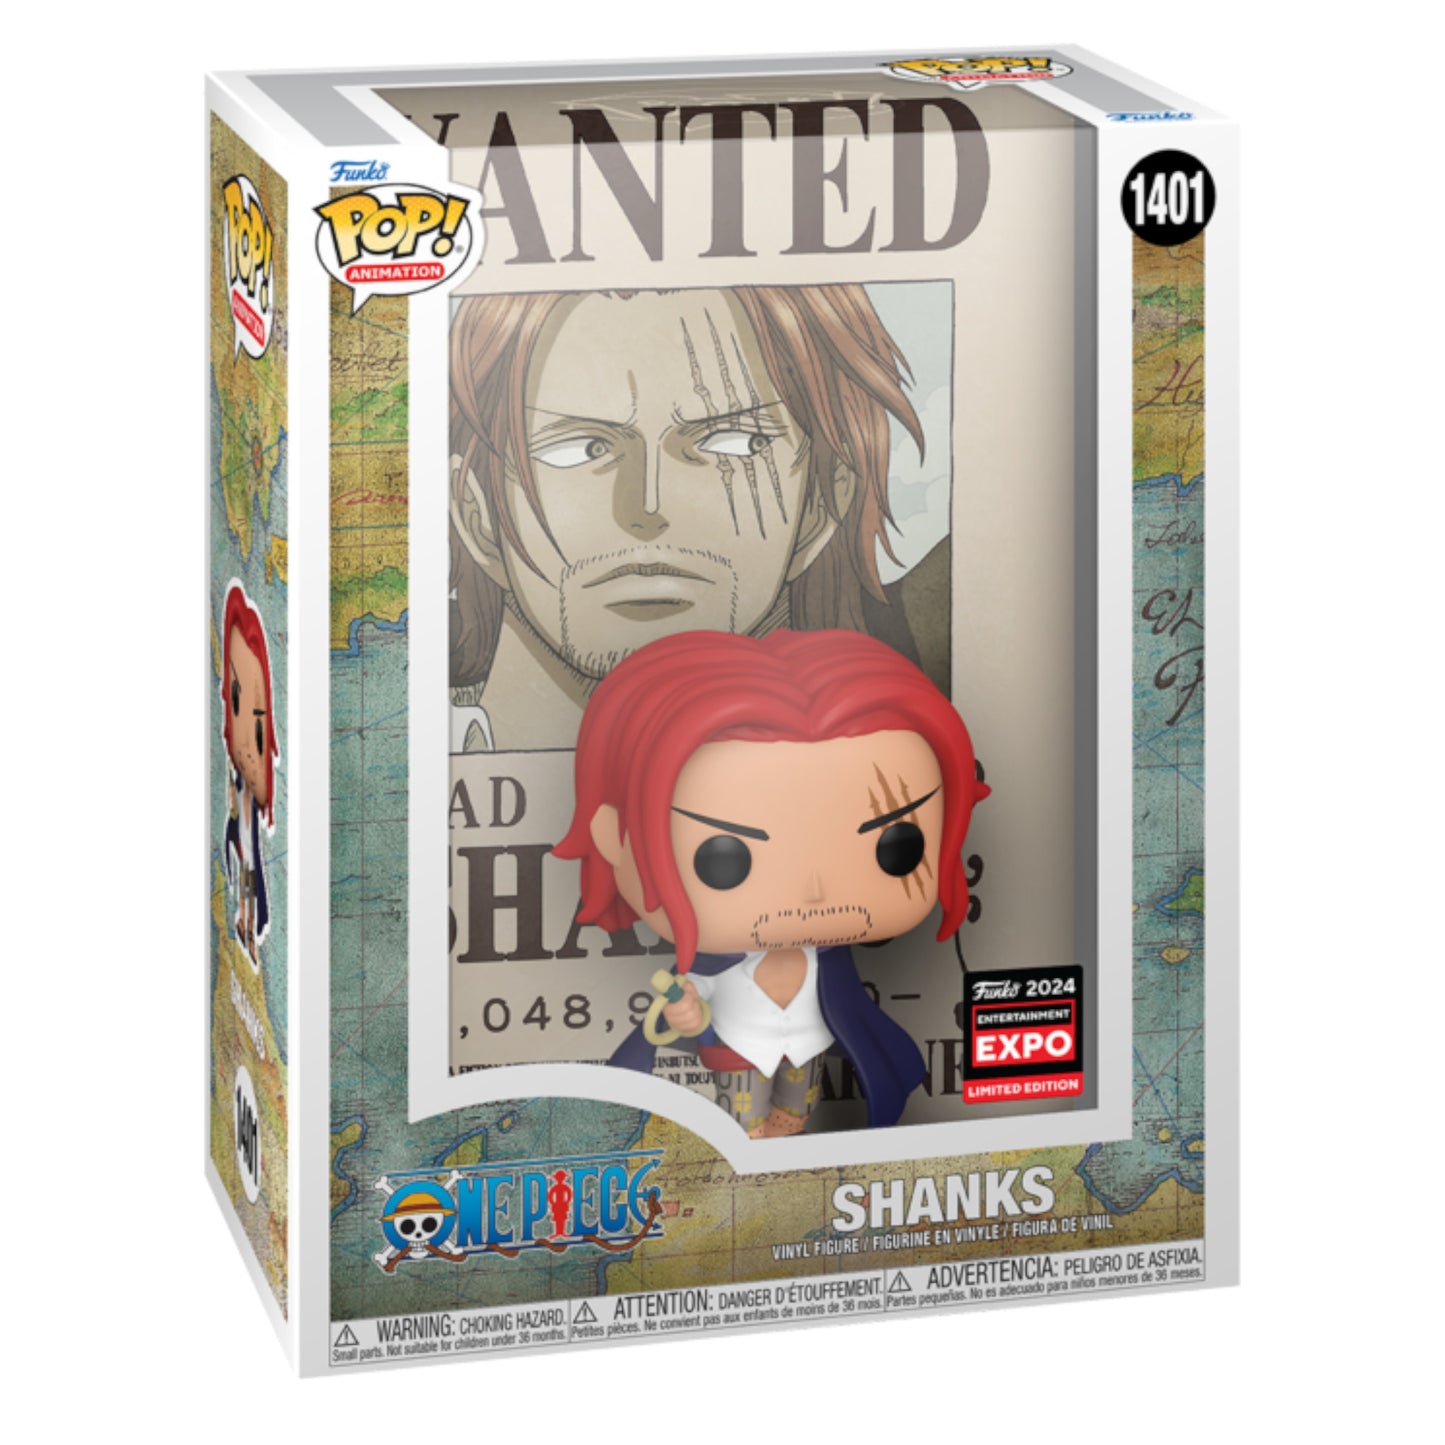 FUNKO POP ONE PIECE SHANKS WANTED C2E2 EXPO 2024 #1401